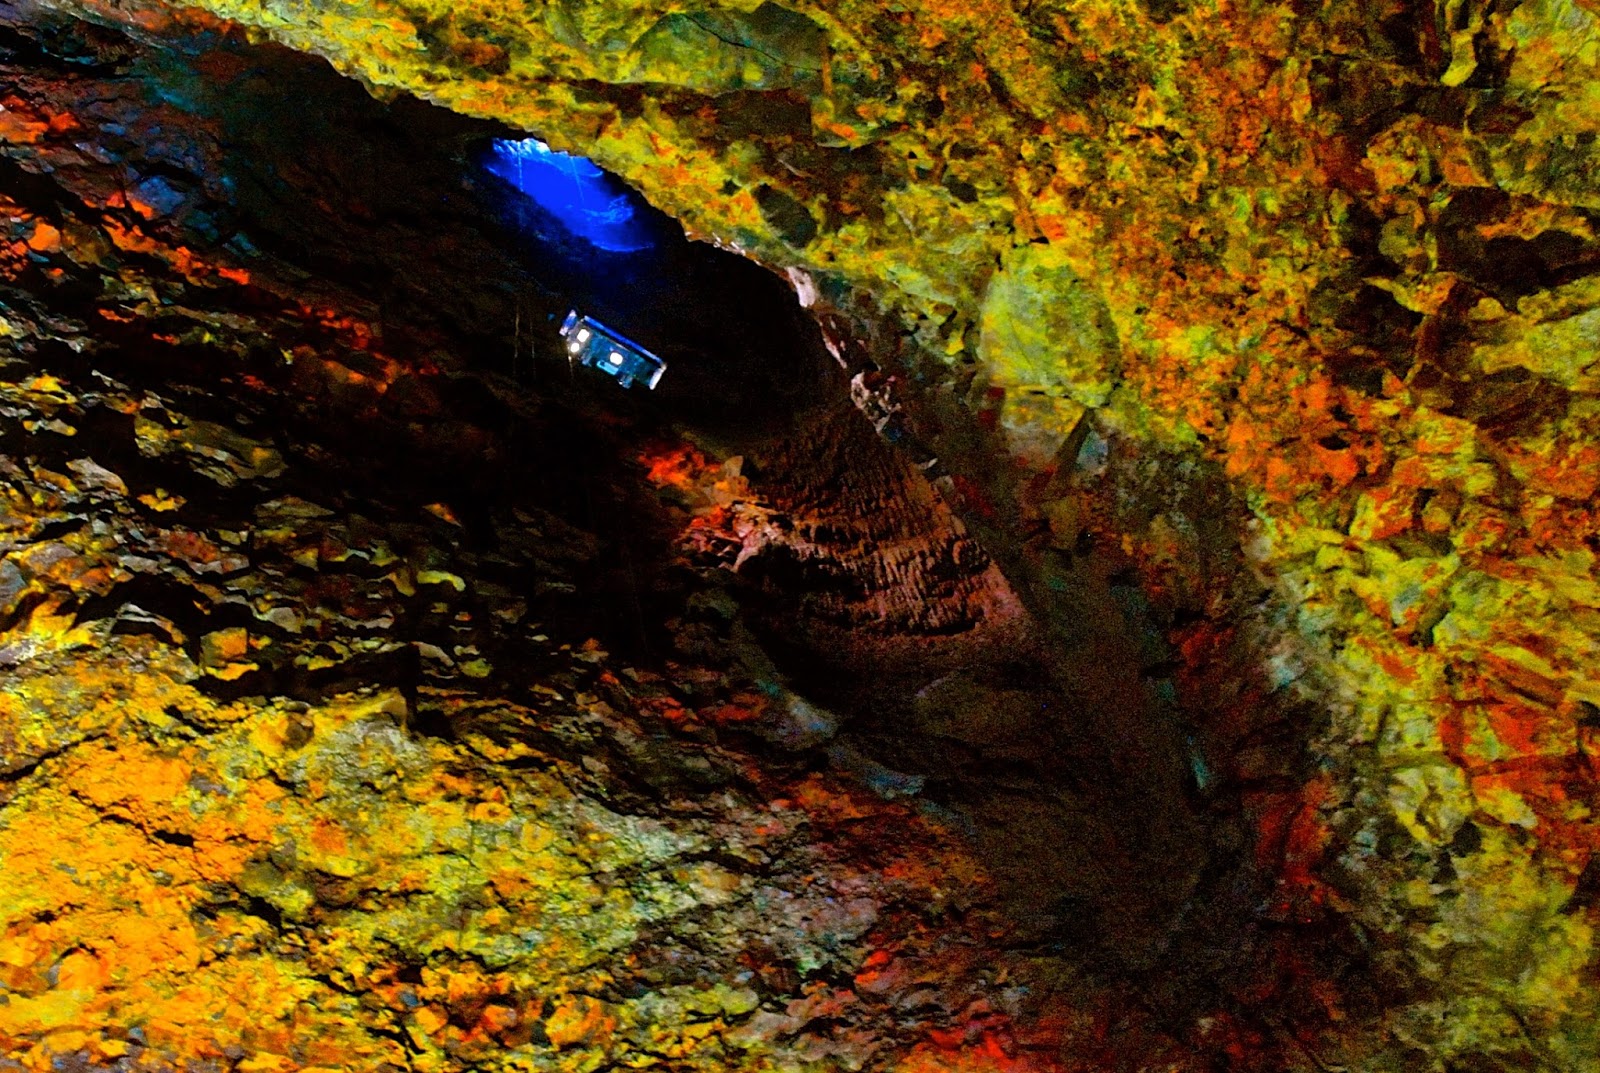 Things to do in Reykjavik Iceland : Take a tour inside the Thrihnukagigur volcano. 